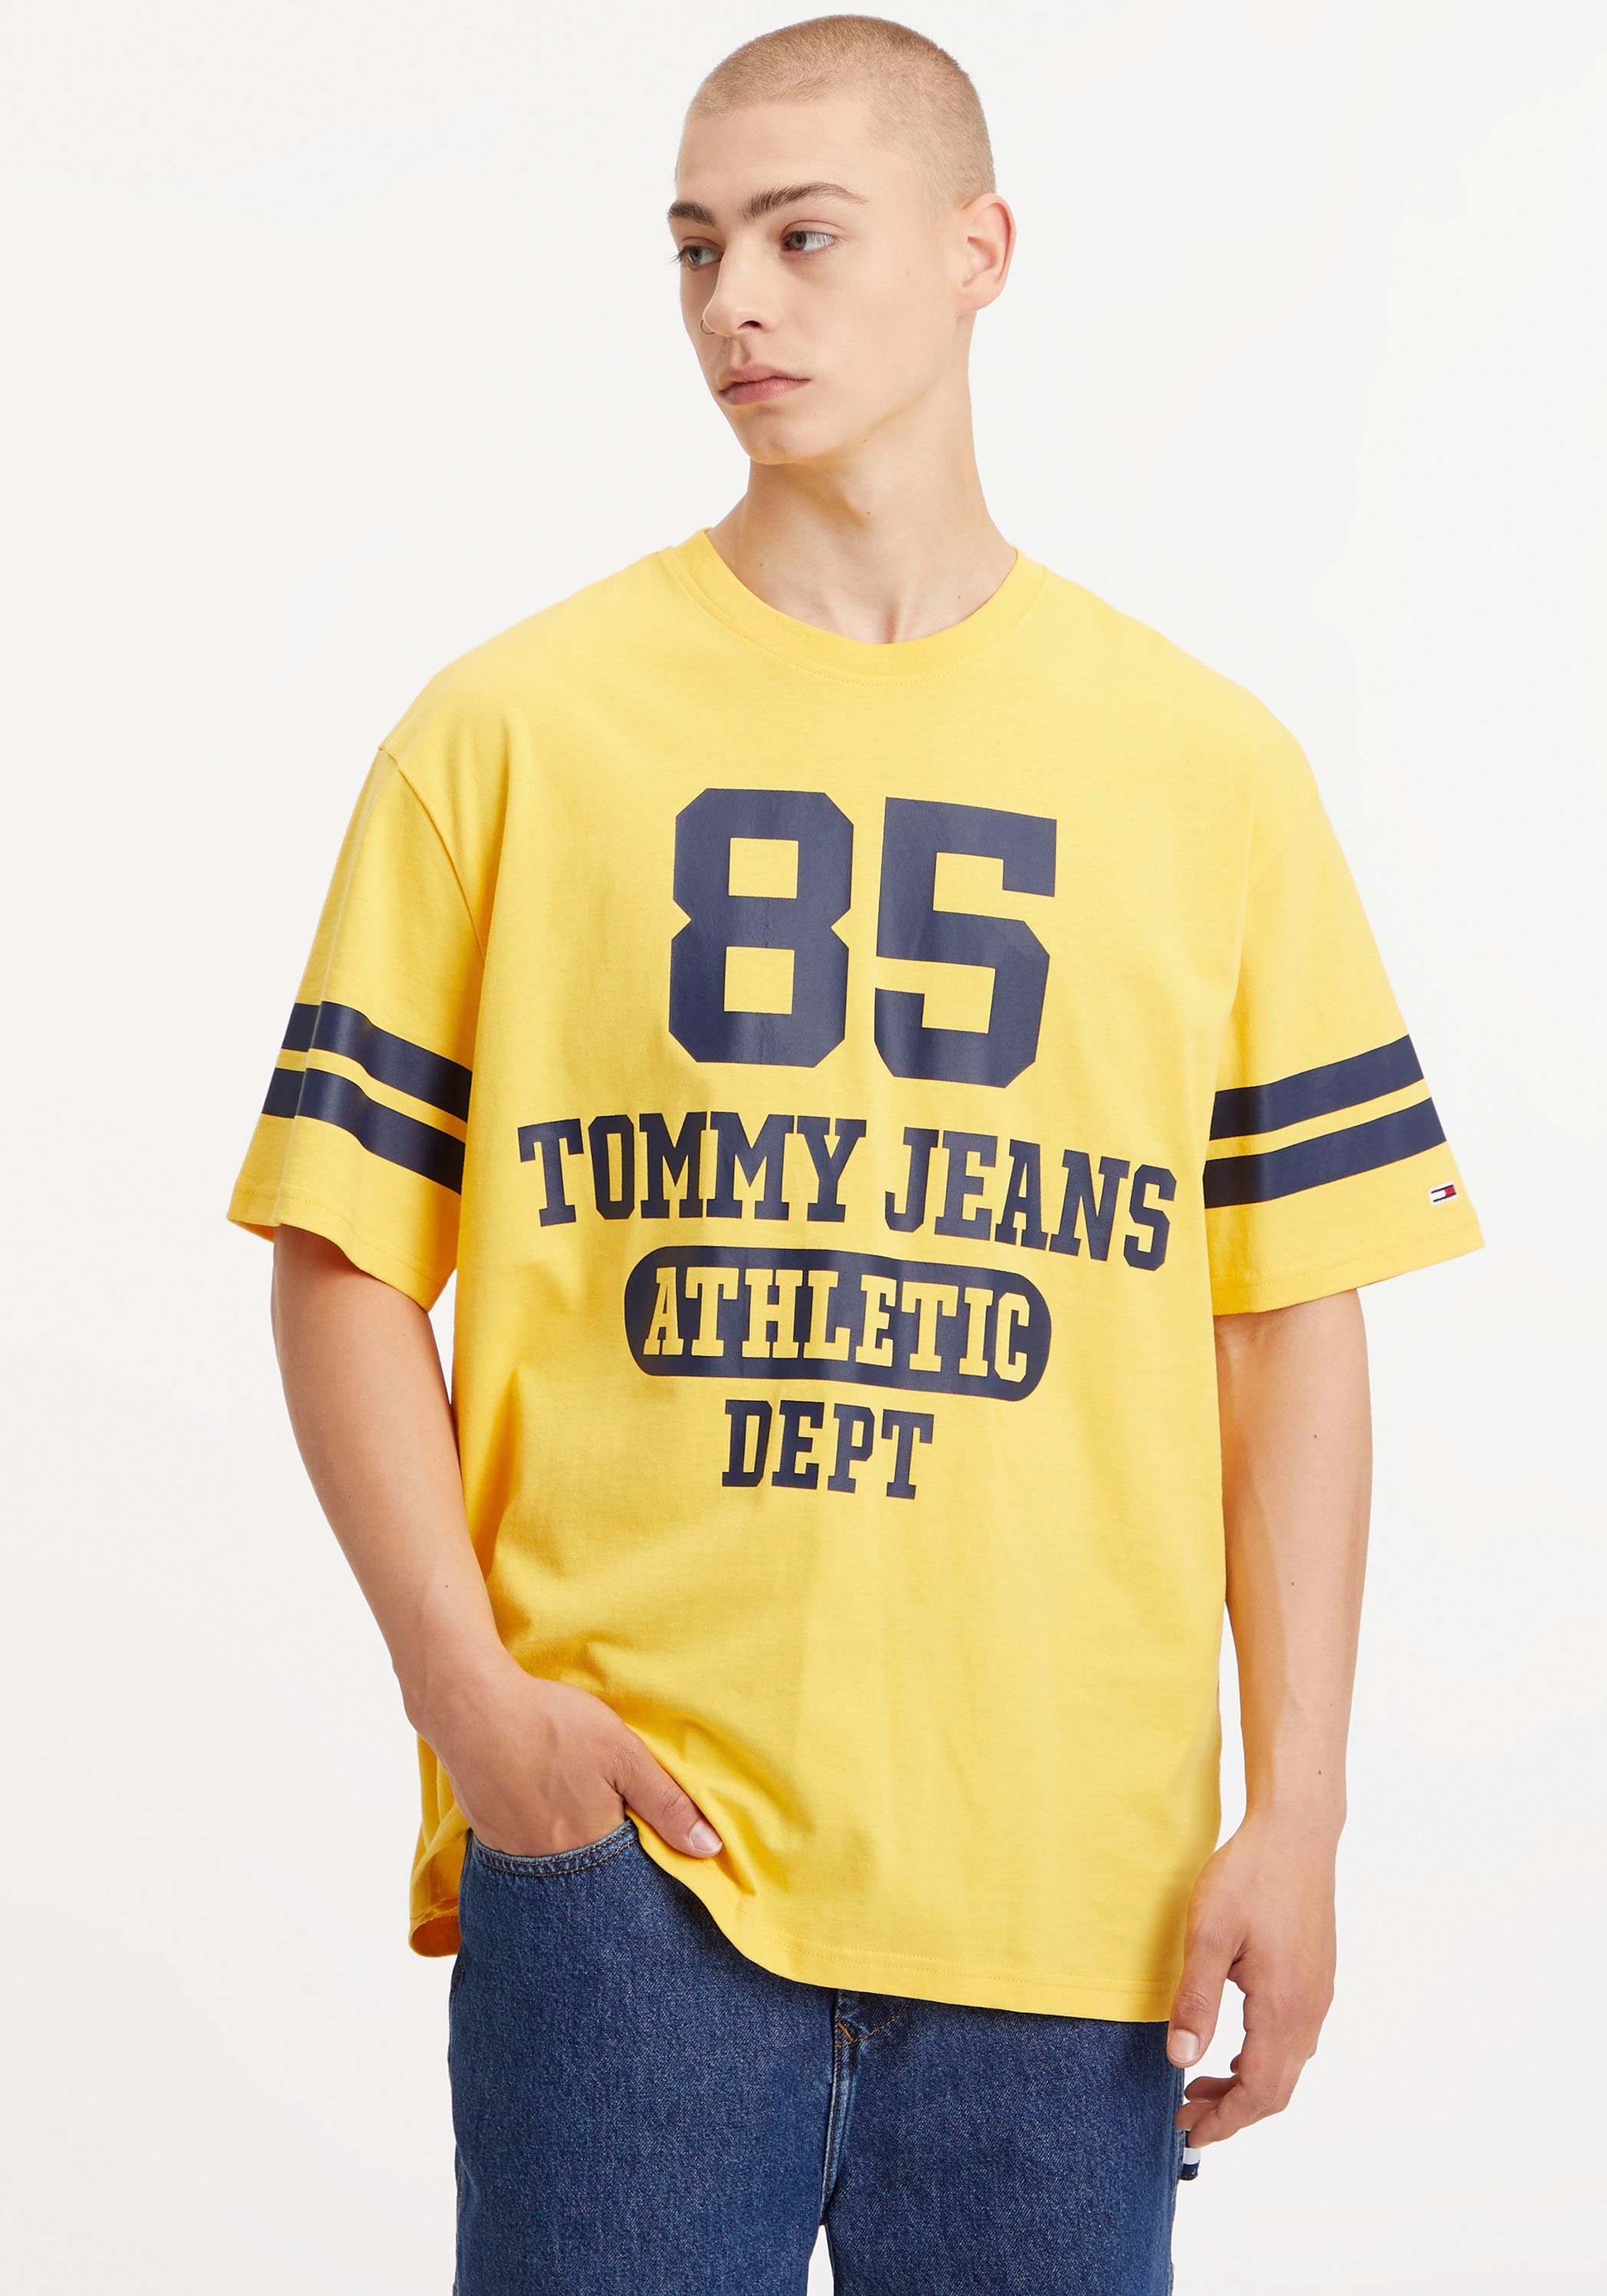 Tommy Jeans Warm T-Shirt LOGO COLLEGE Yellow 85 SKATER TJM